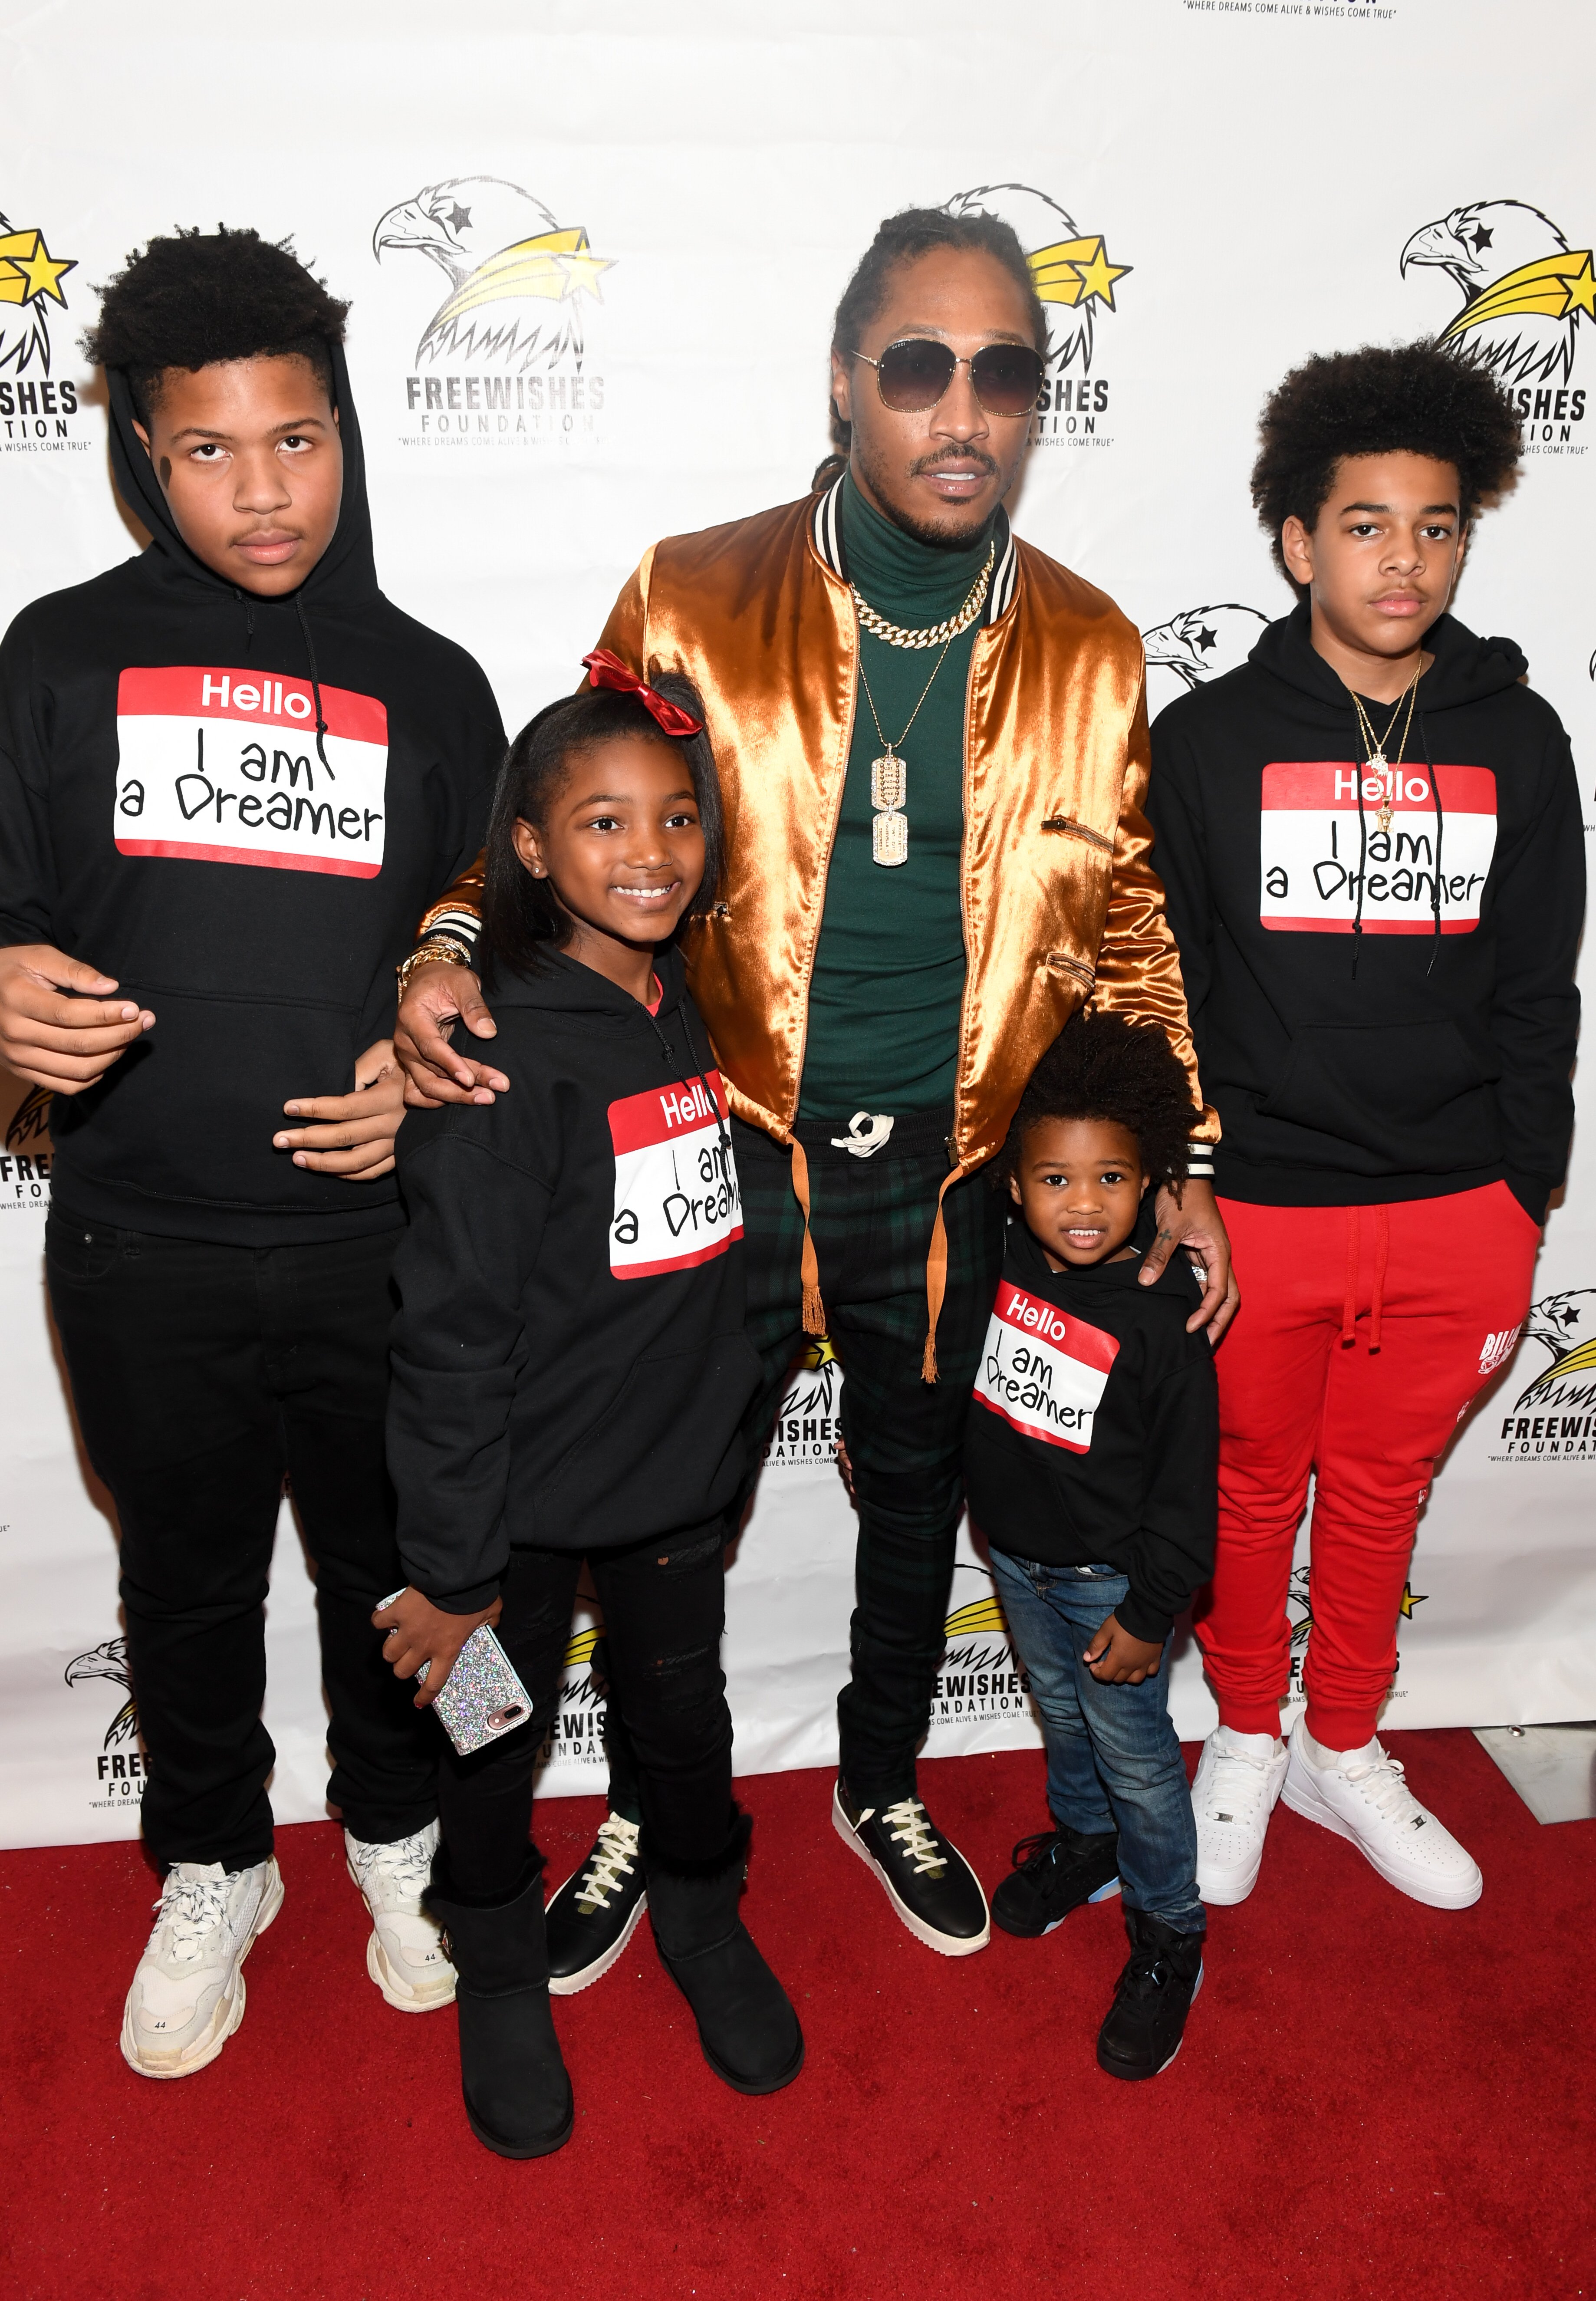 Future with his children at the 5th Annual FreeWishes Foundation hosted at Bessie Branham Park, Atlanta, Georgia on December 17, 2017. | Source: Getty Images